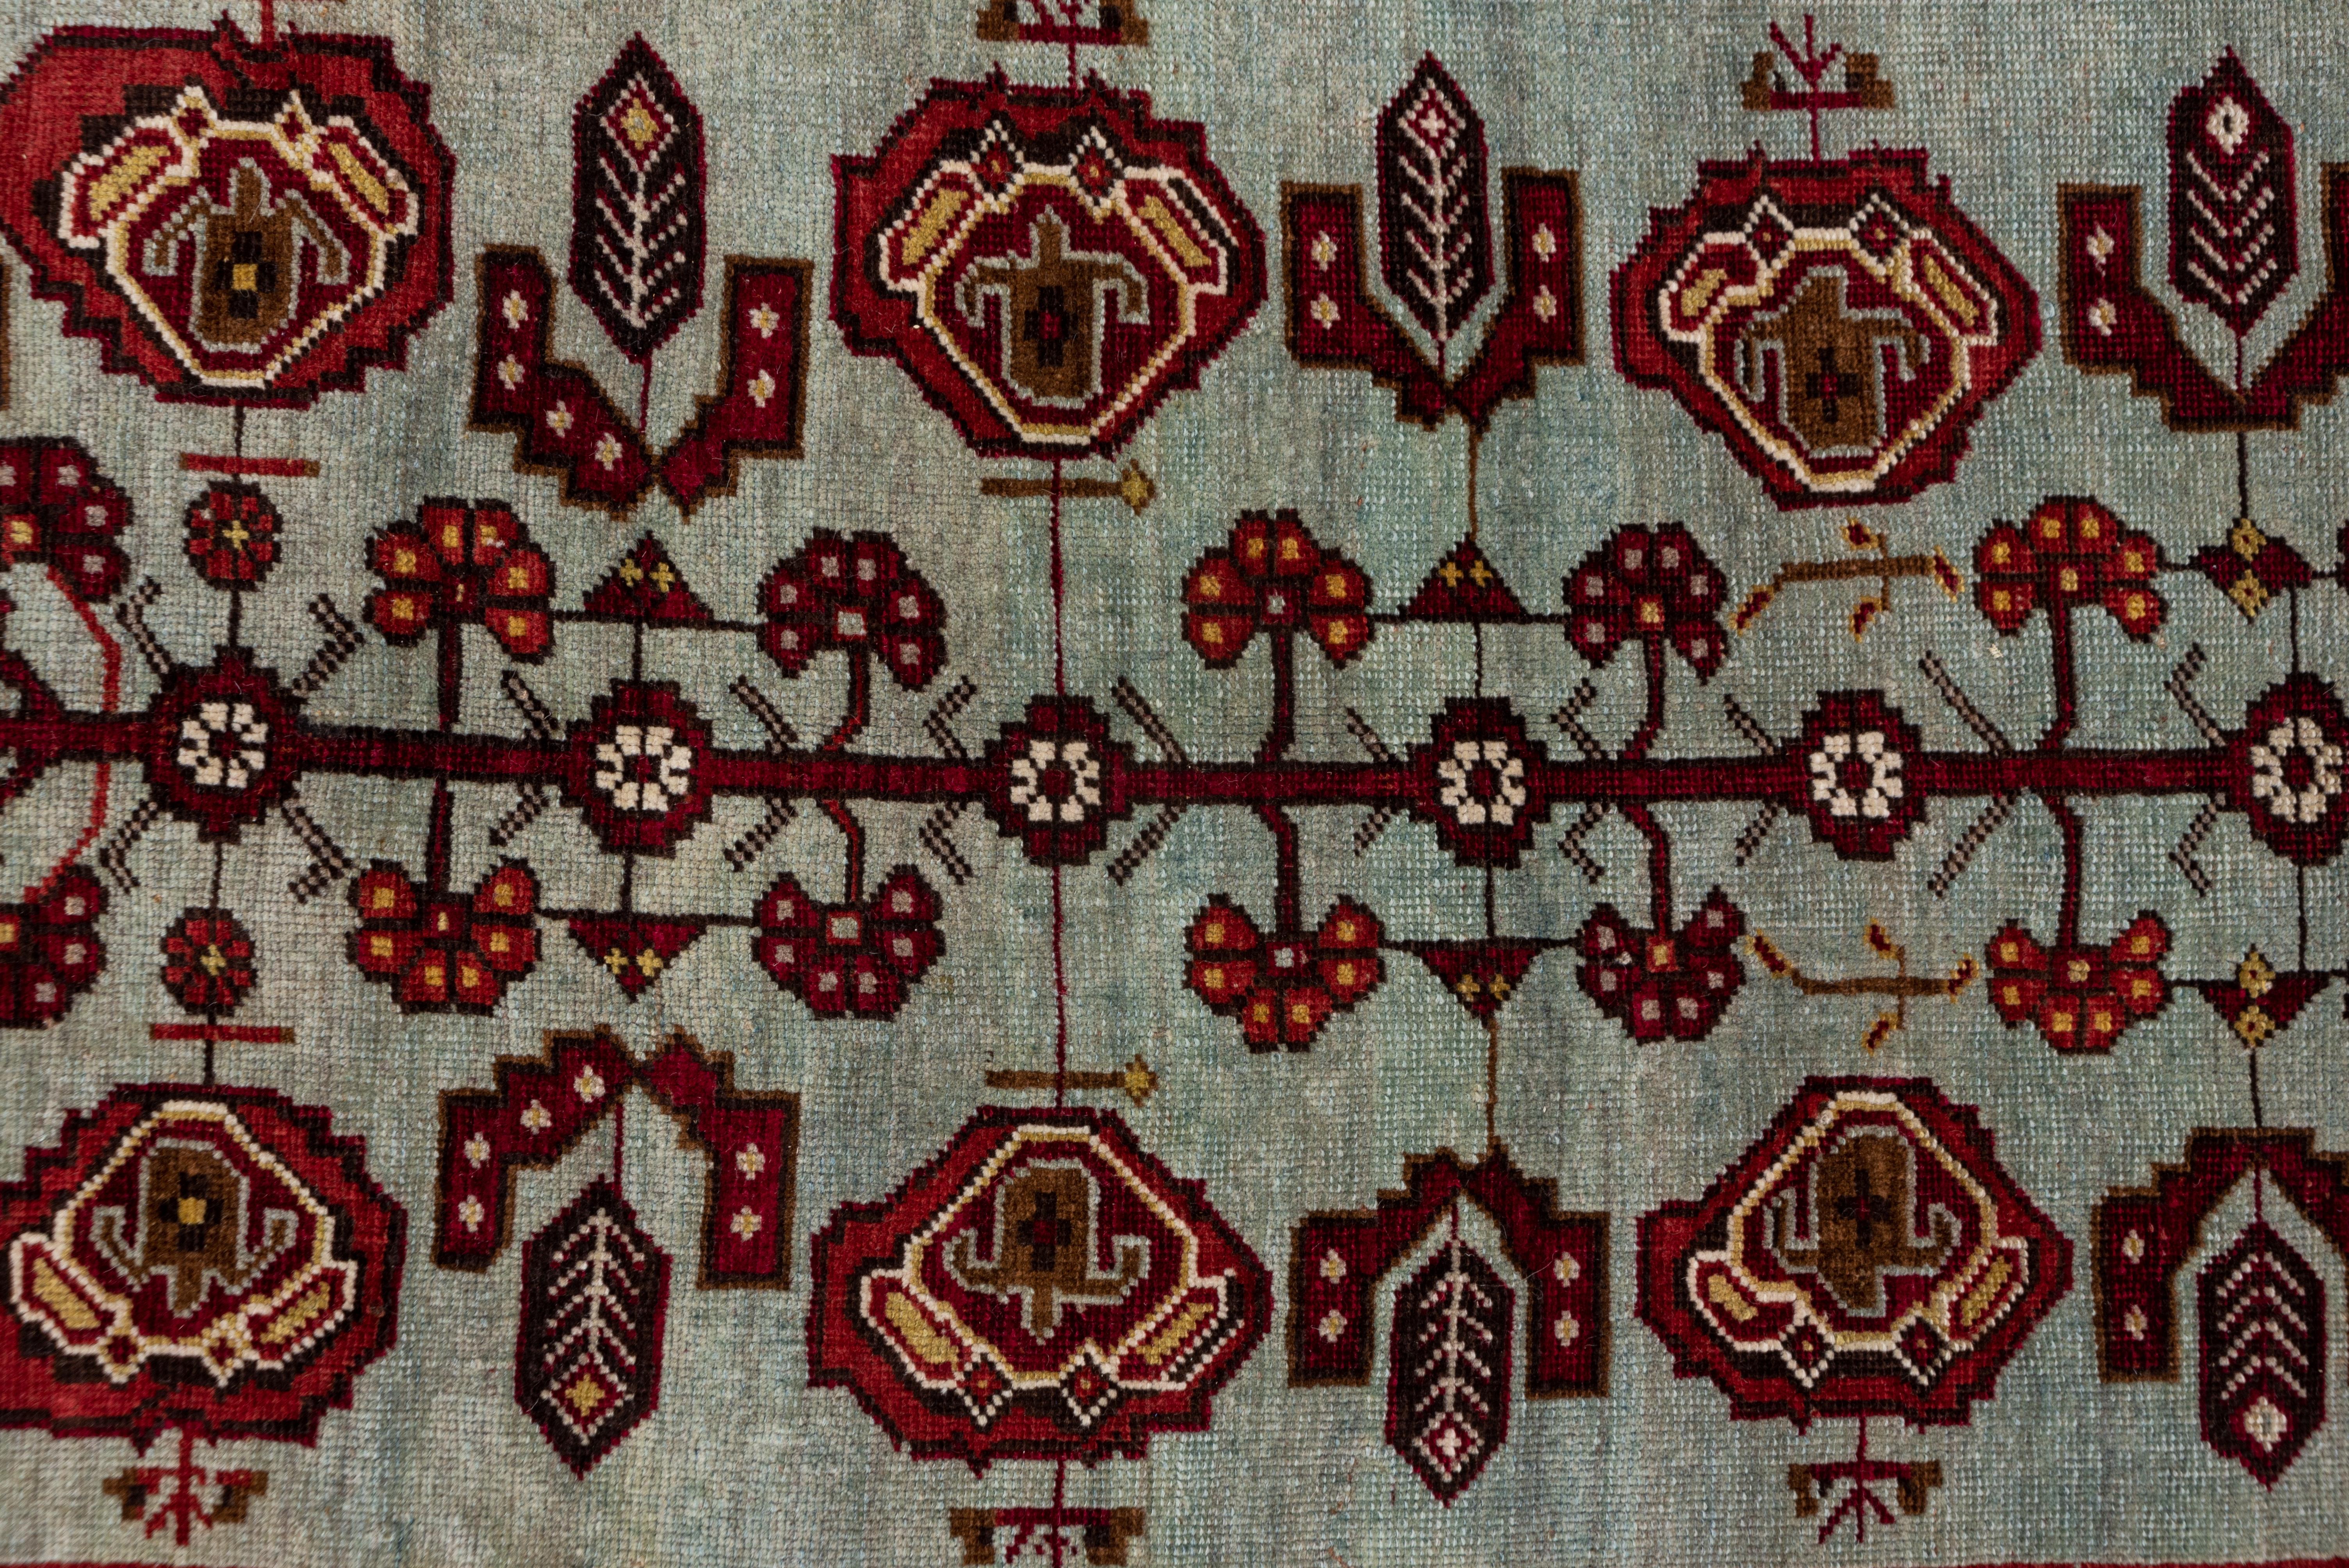 This Oushak rug has an intense wine-red field that displays a slender, geometric tendril flowing around the hexagonal pale blue-grey subfield with a central staff featuring carnations, palmettes, rosettes and leaves. The nicely abrashed green border